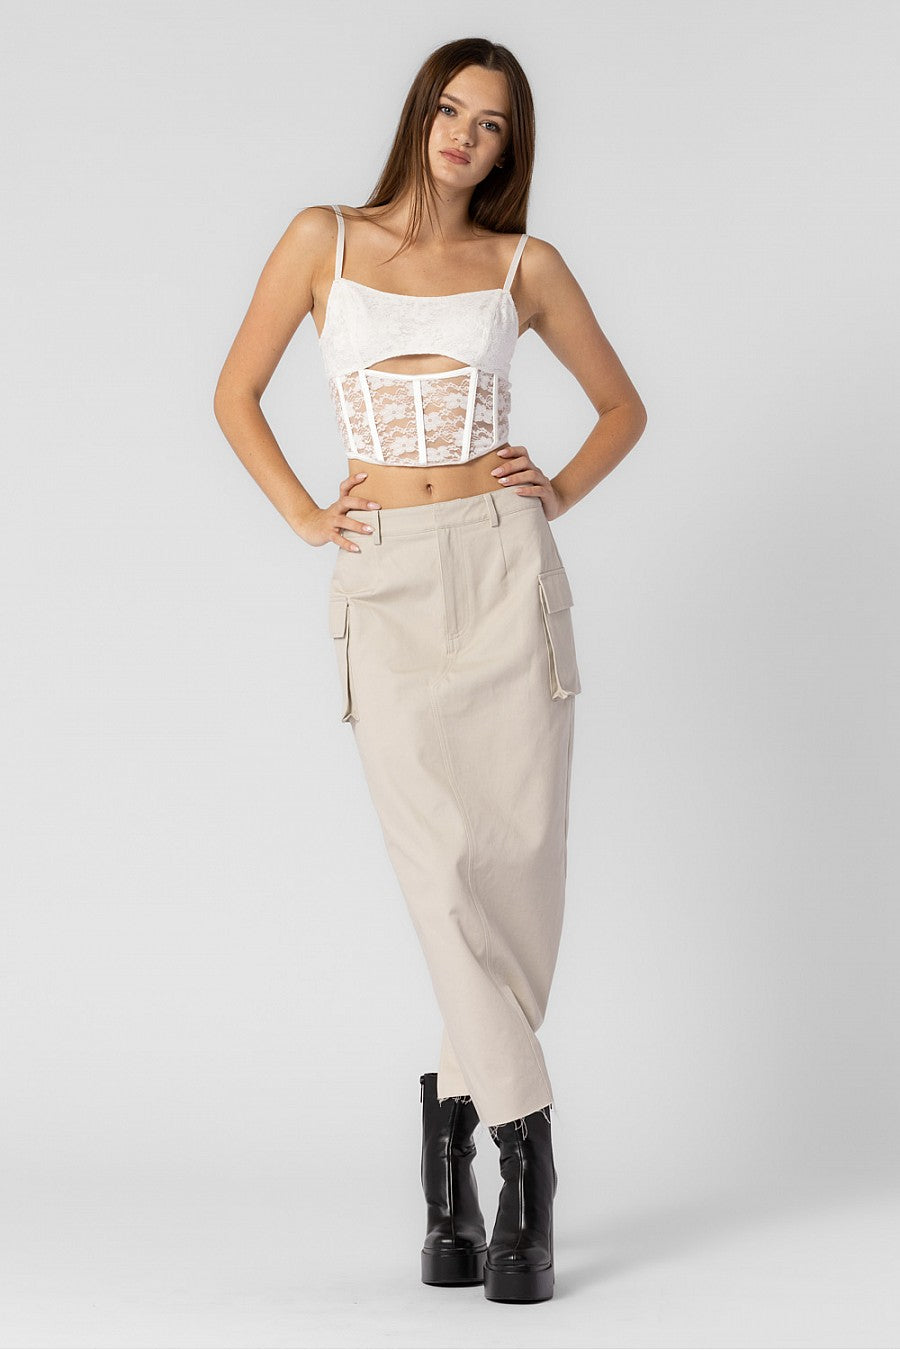 Model is wearing a maxi cargo skirt with side pockets.